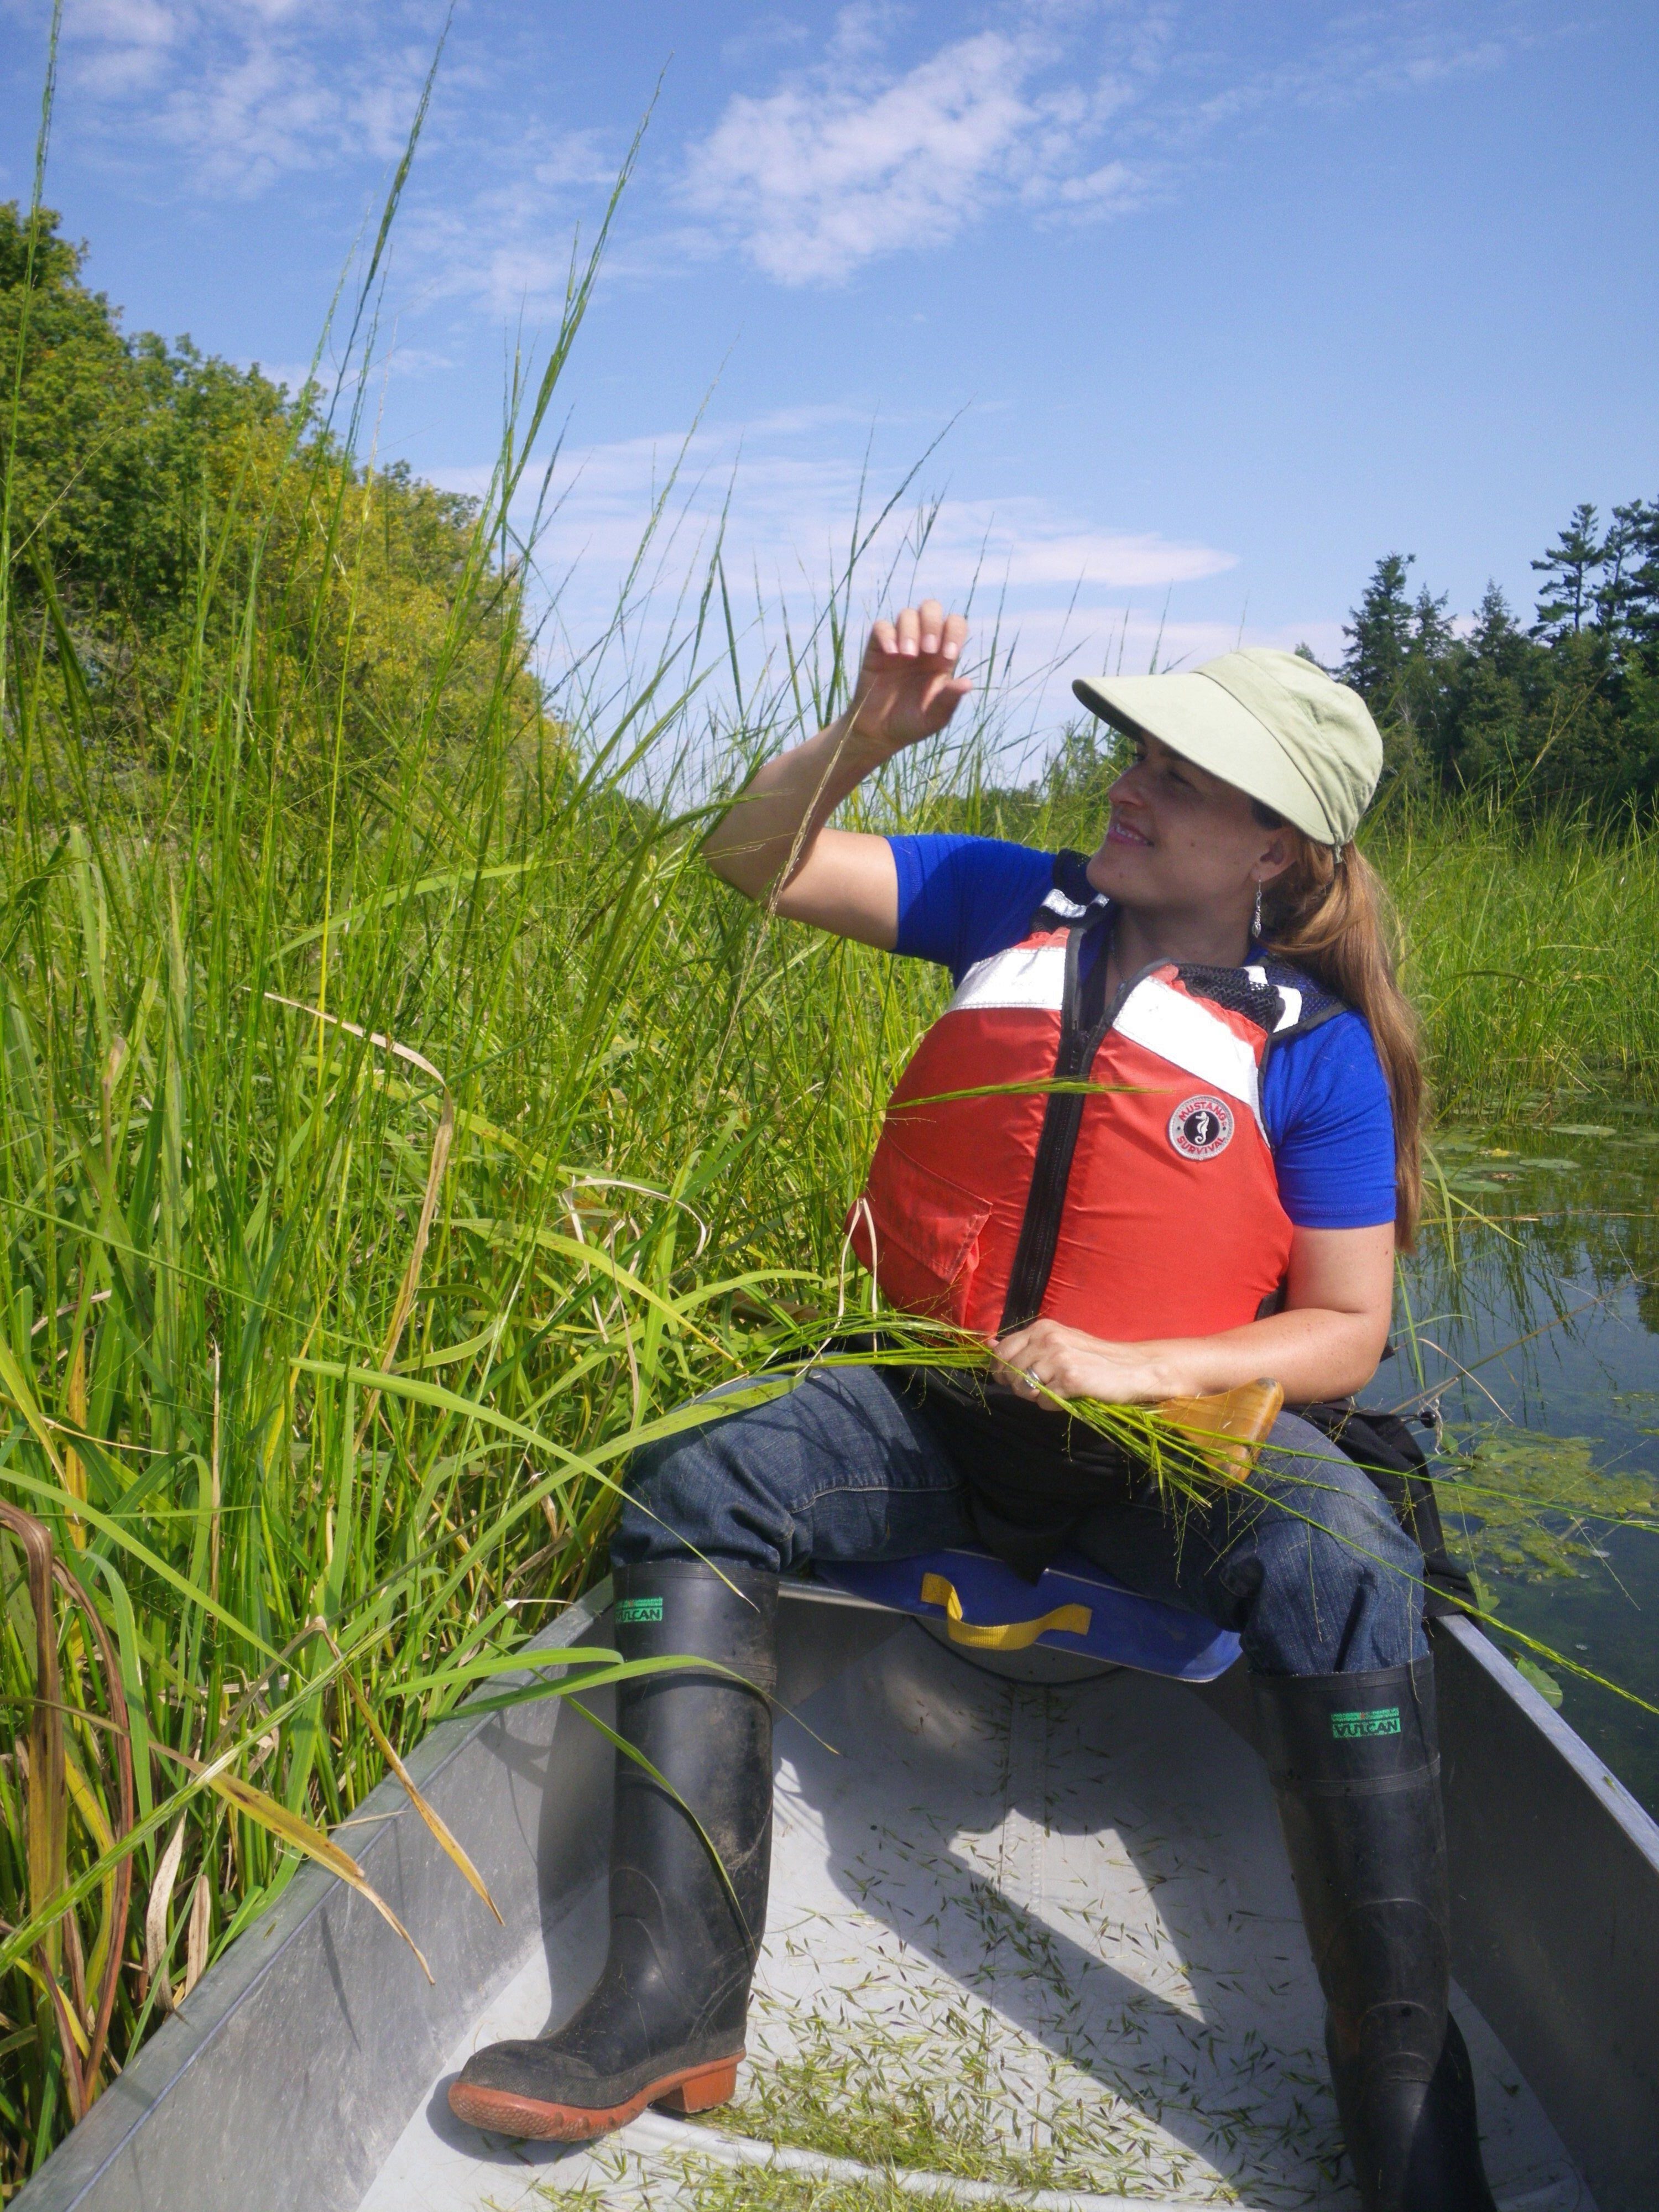 Conservation authority employee in small metal boat by tall grasses.